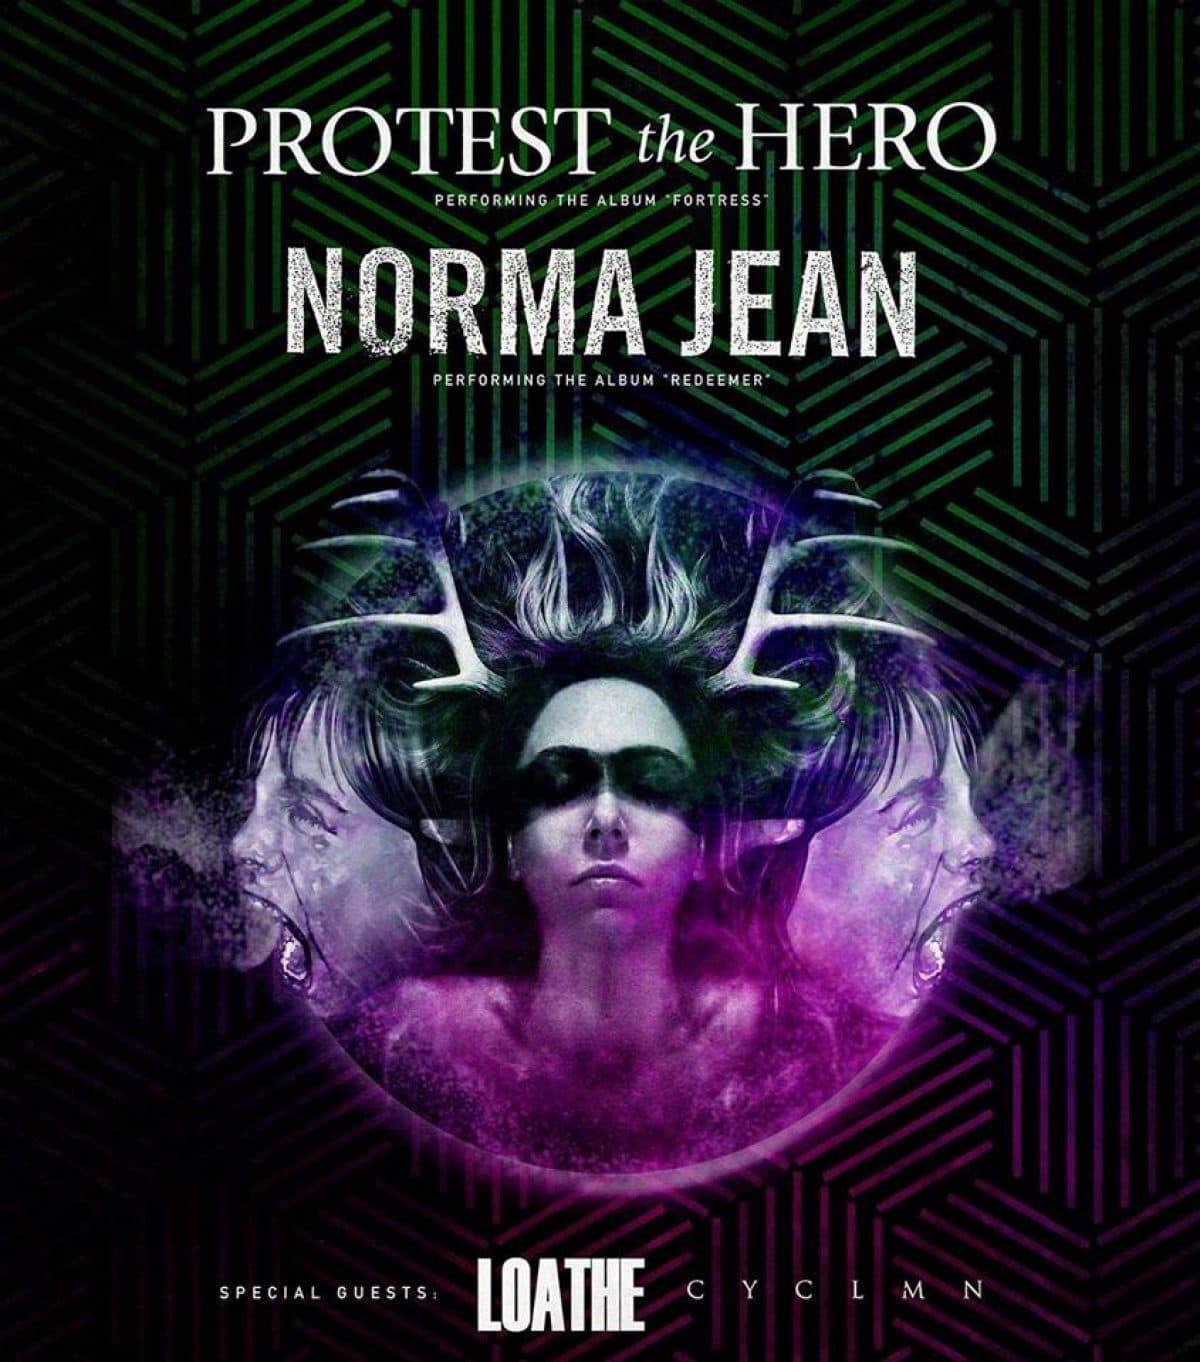 PROTEST THE HERO (CAN) + NORMA JEAN (US) + SUPPORT